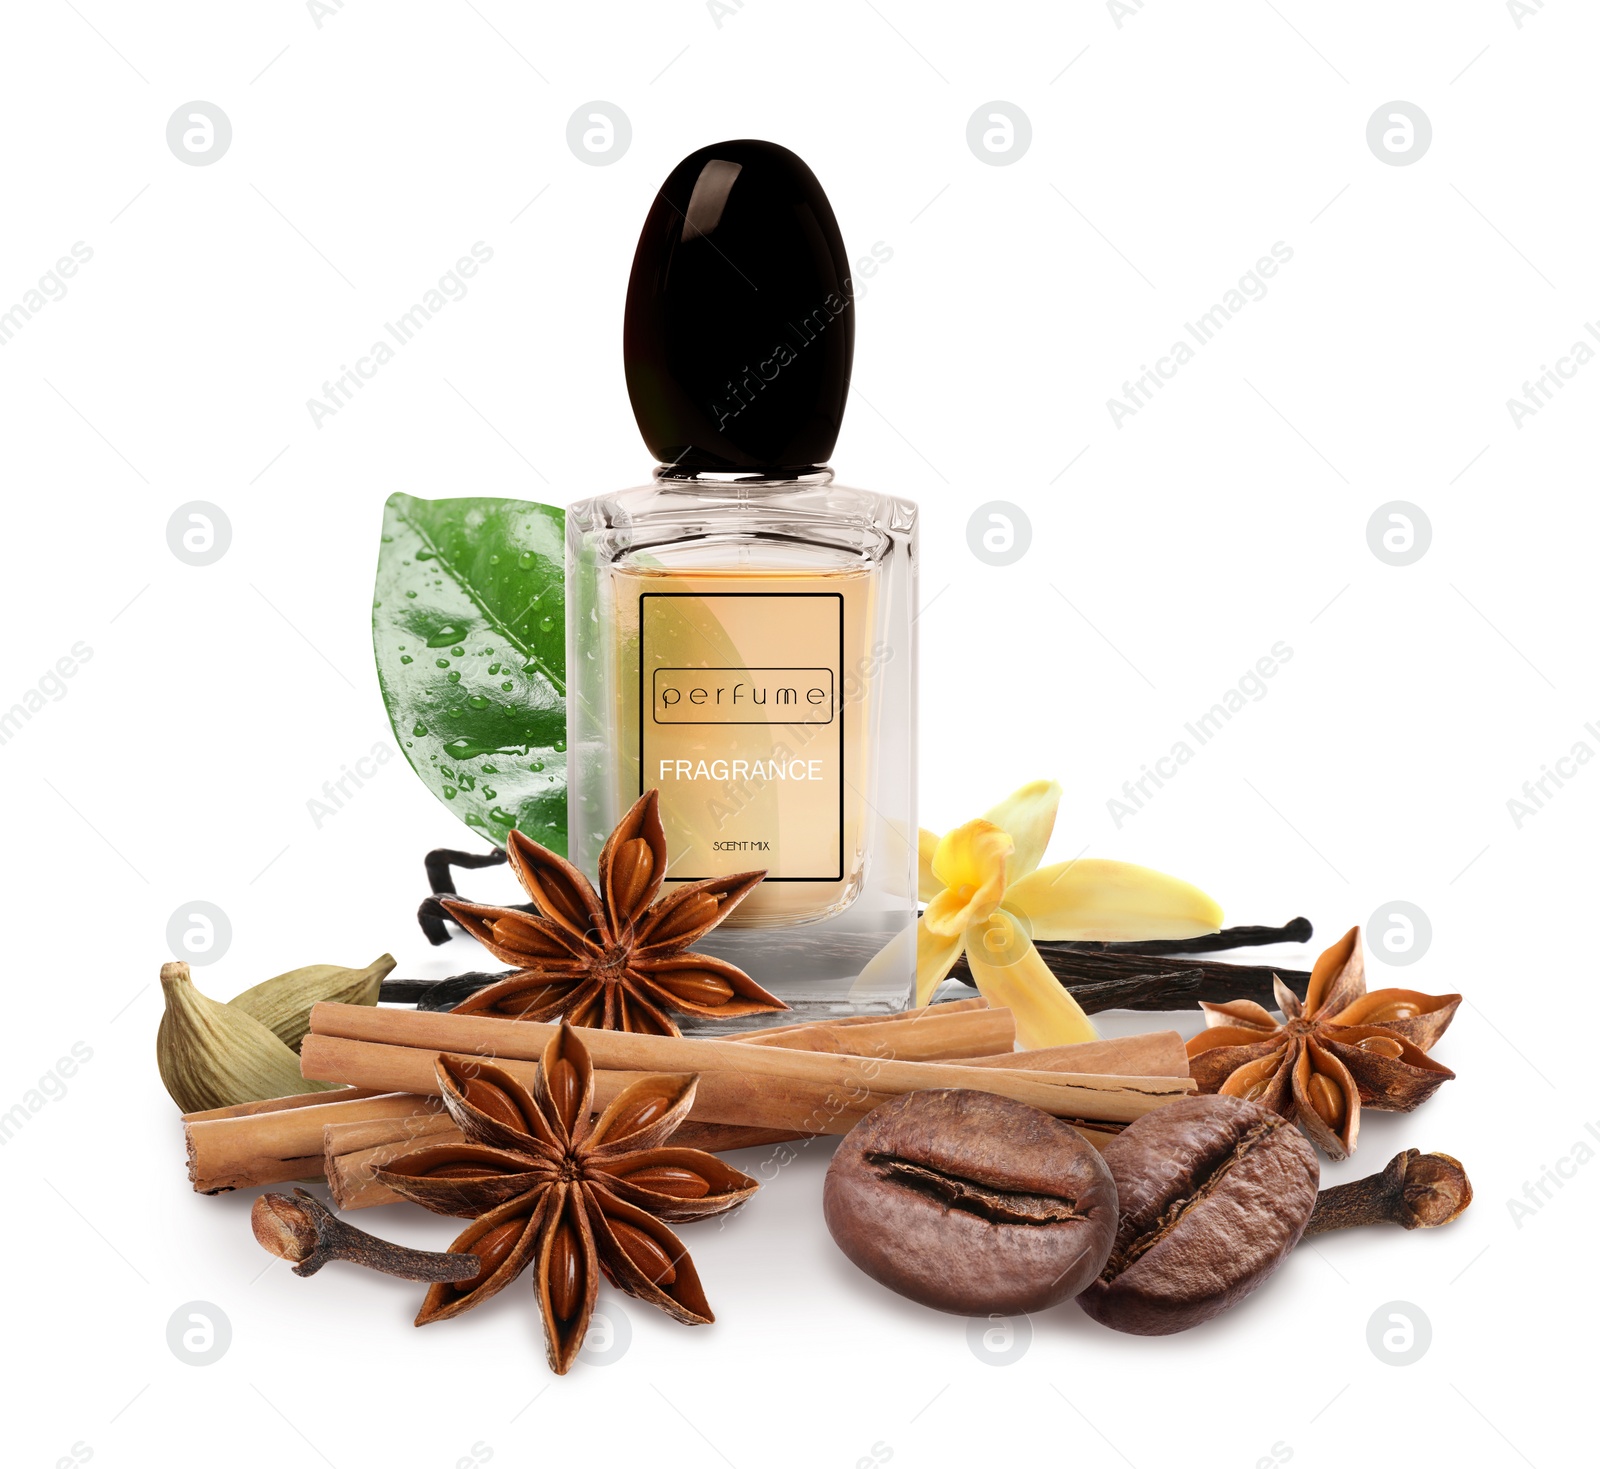 Image of Bottle of perfume and different spices on white background